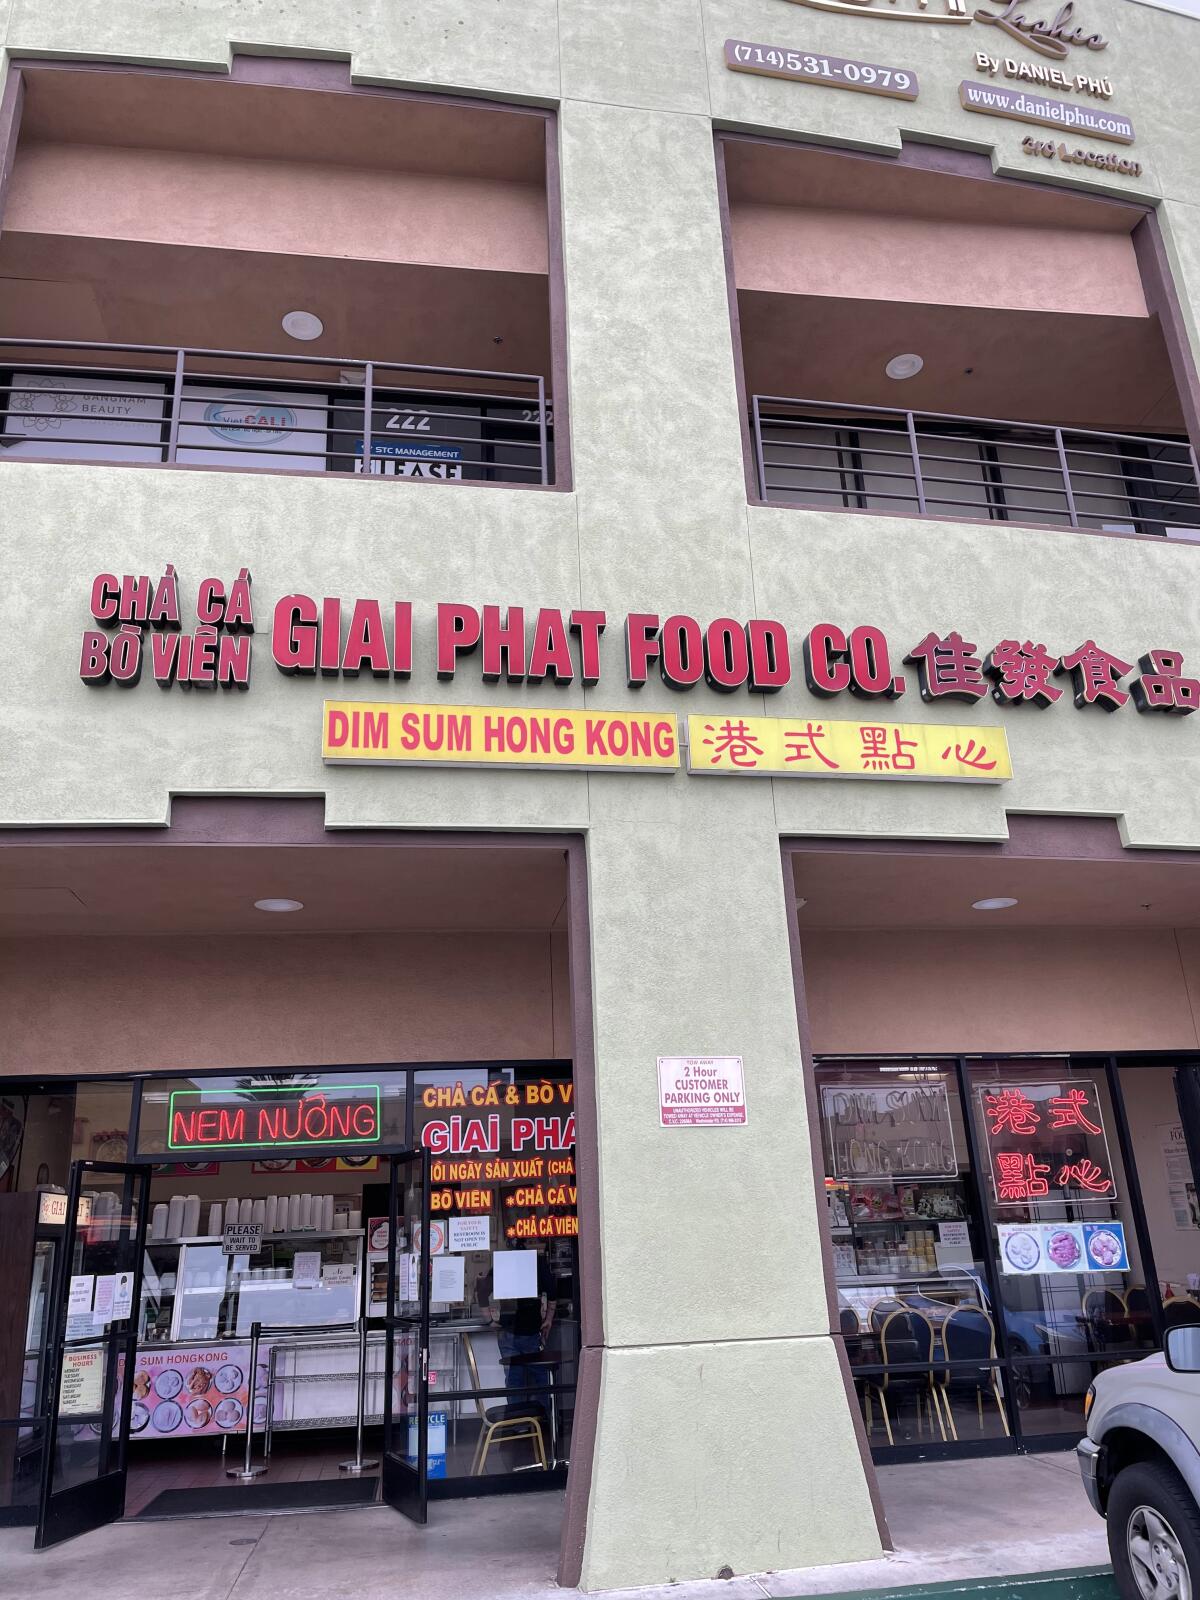 Giai Phat Food Co. occupies its own storefront in Westminster. 